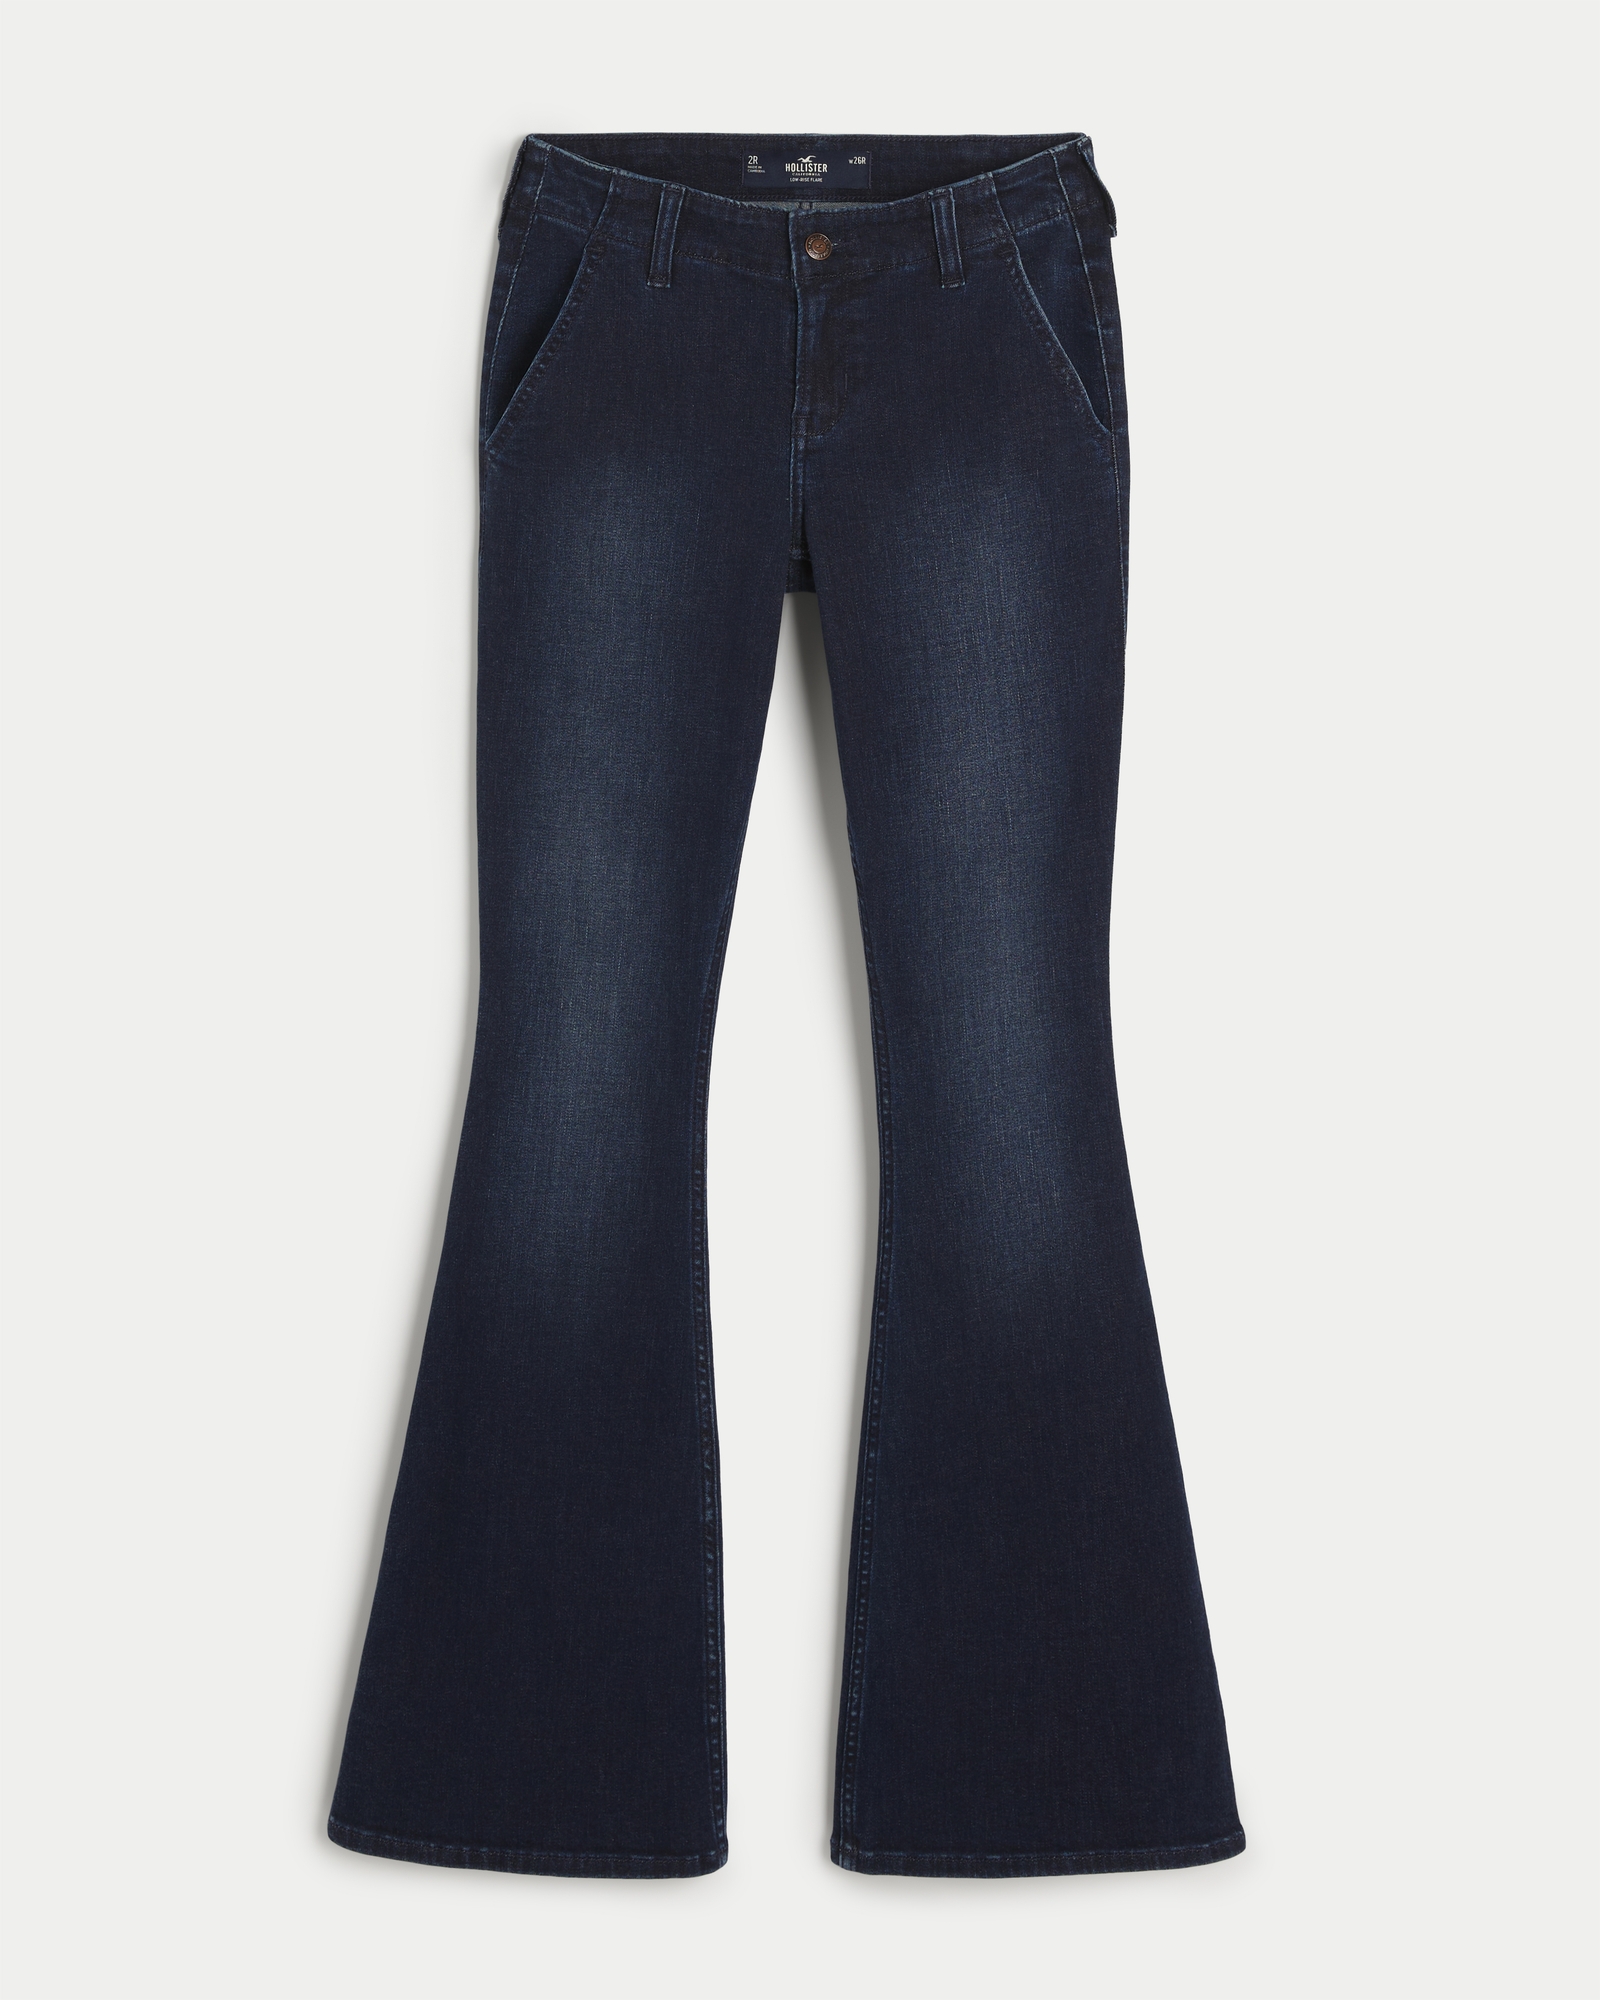 Hollister Social Stretch Flare Jeans, Size 3-Long